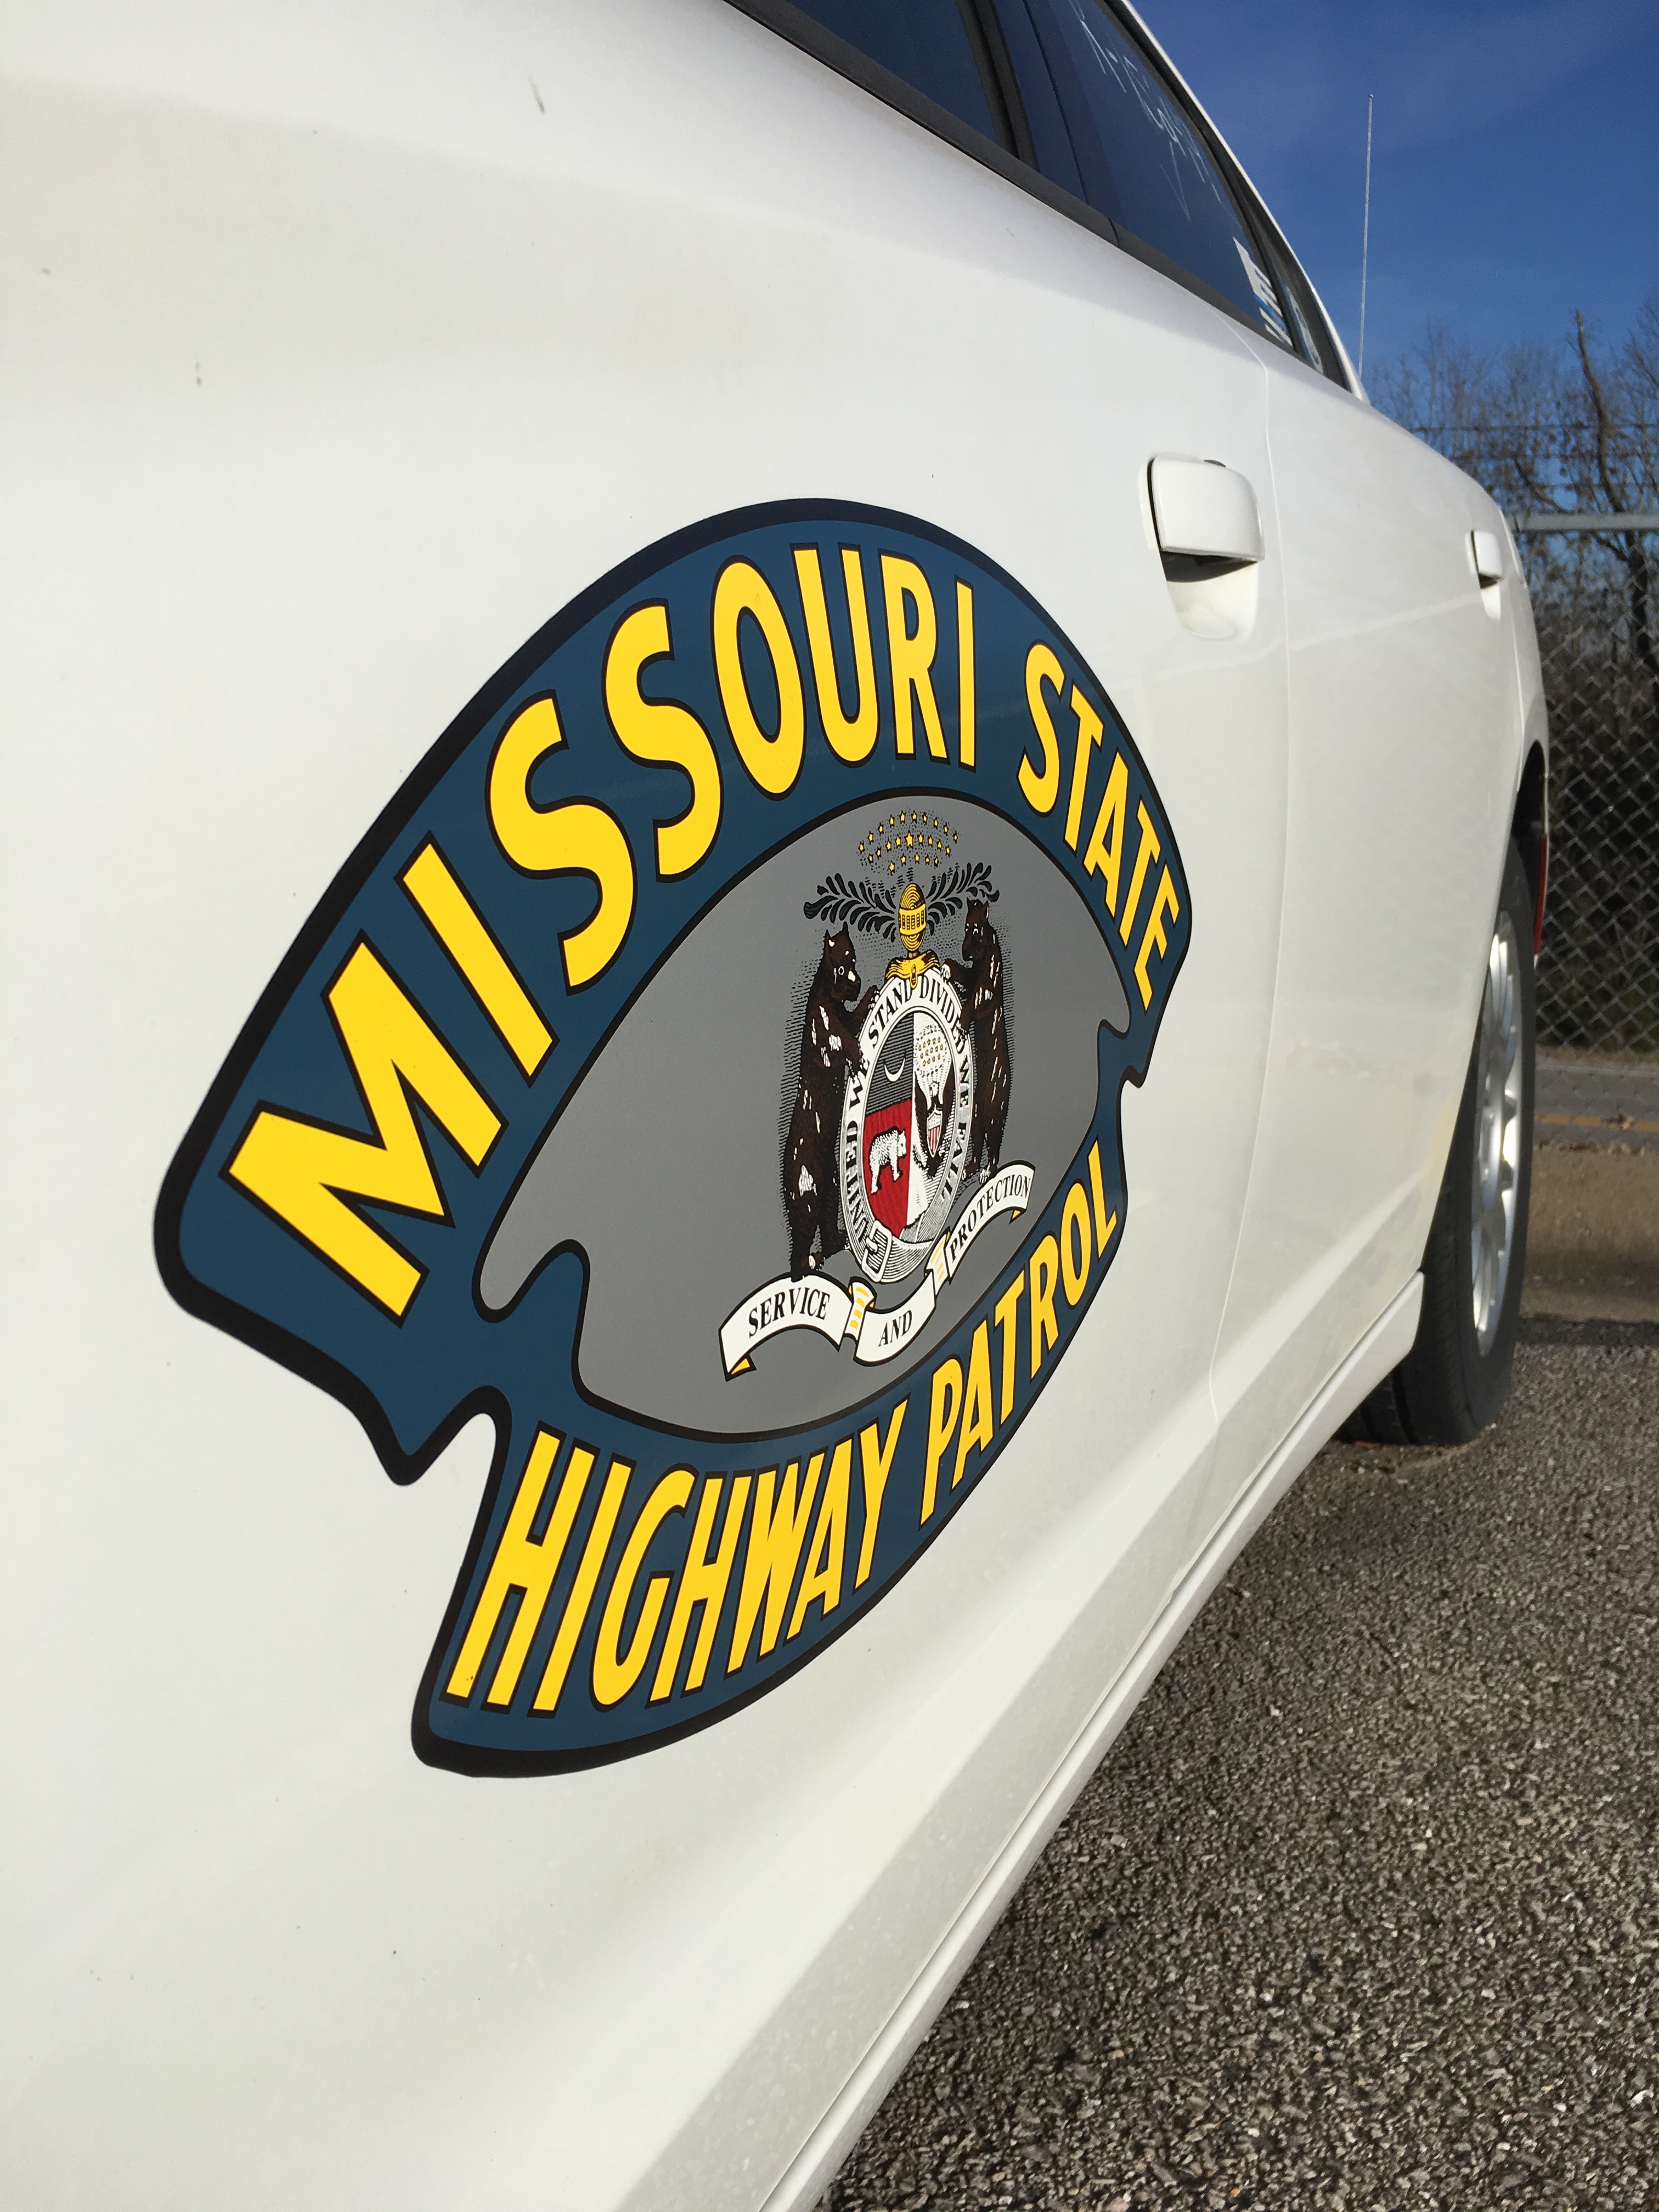 Missouri Highway Patrol Reports Two Fatalities Over Holiday Counting Period